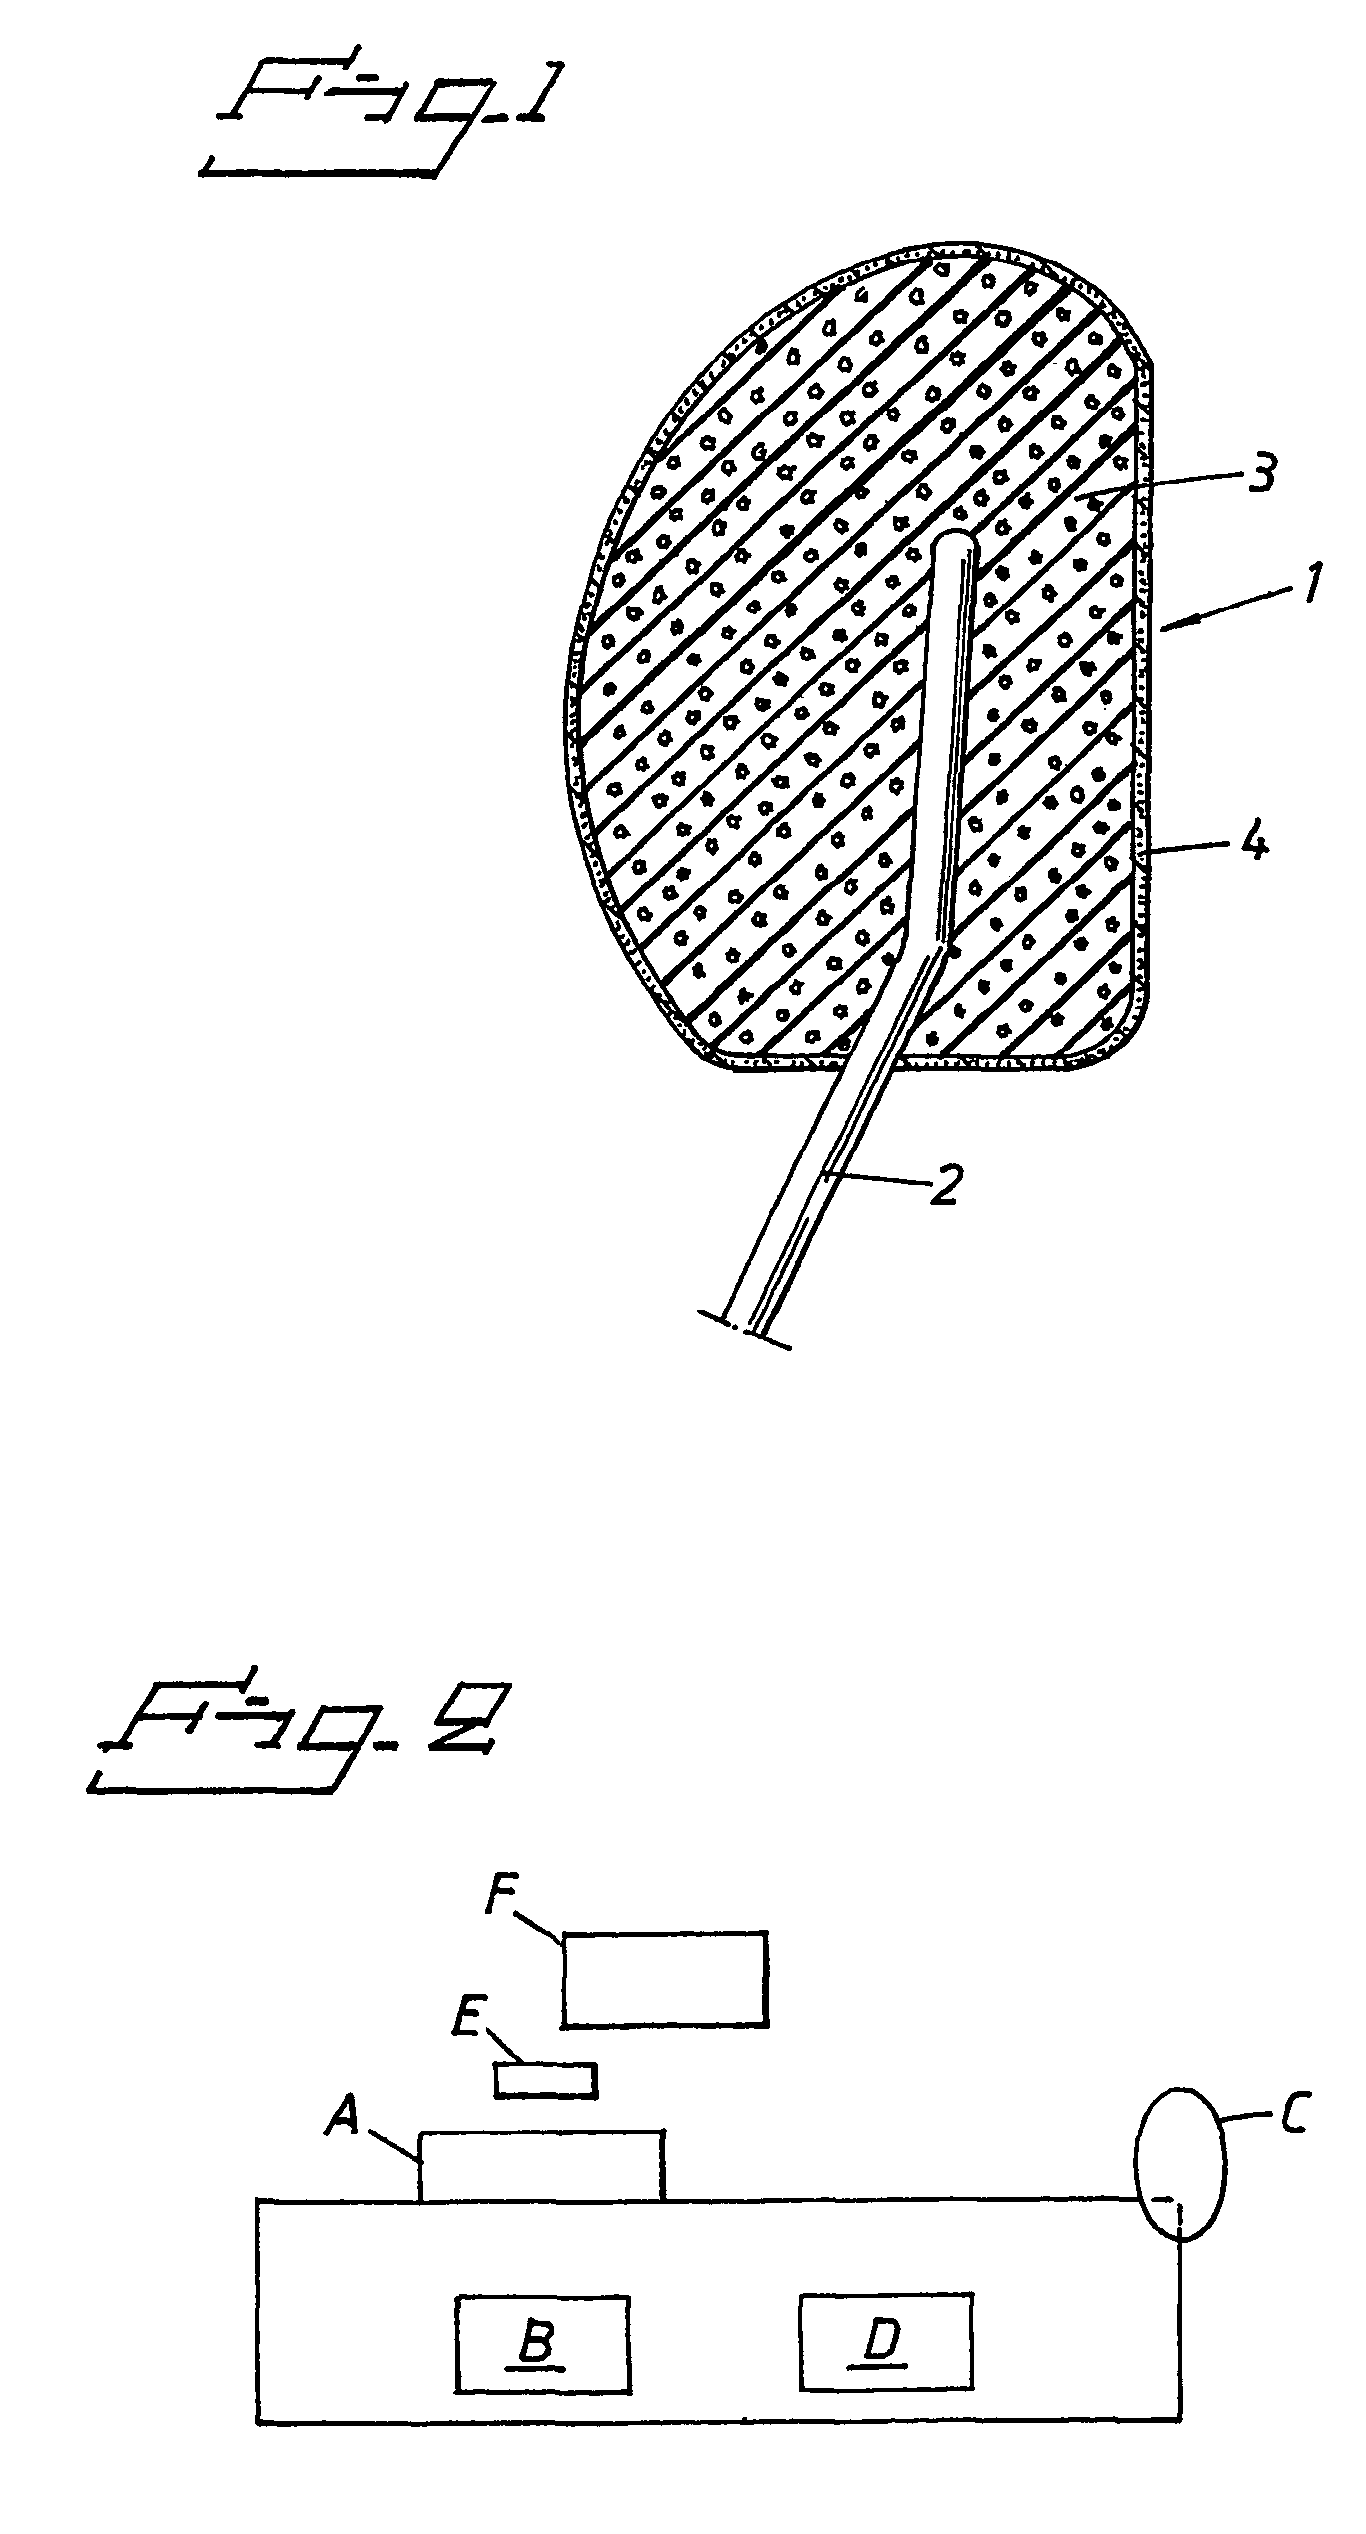 Headrest for alleviating whiplash injury and the use of specific polyurethane foams therein